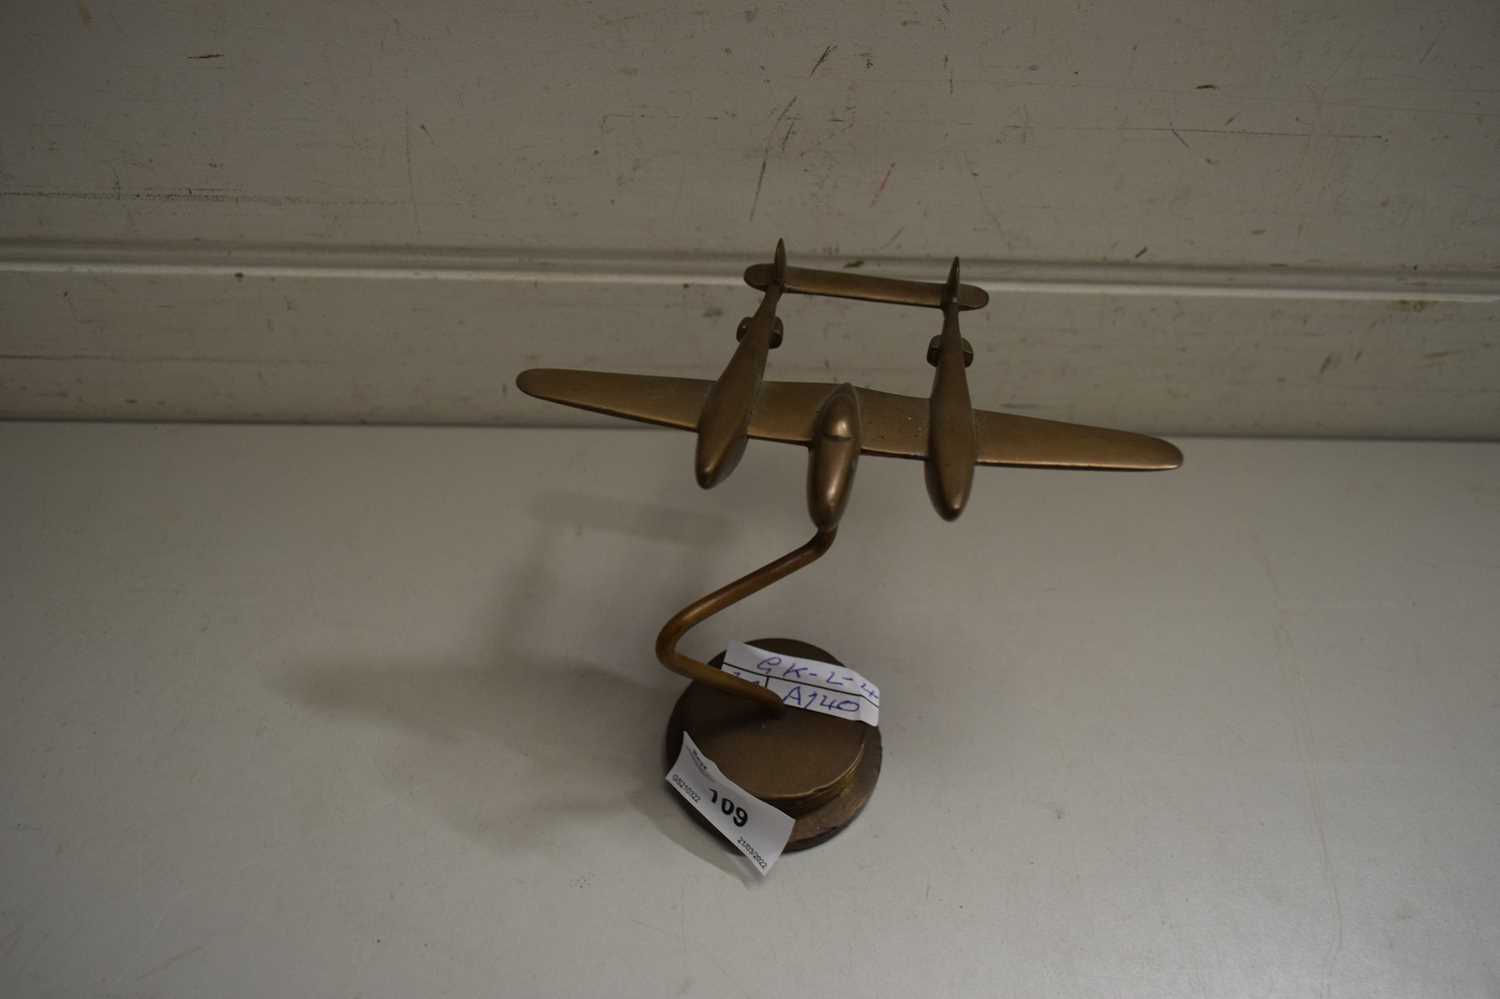 DESK ORNAMENT FORMED AS A PLANE